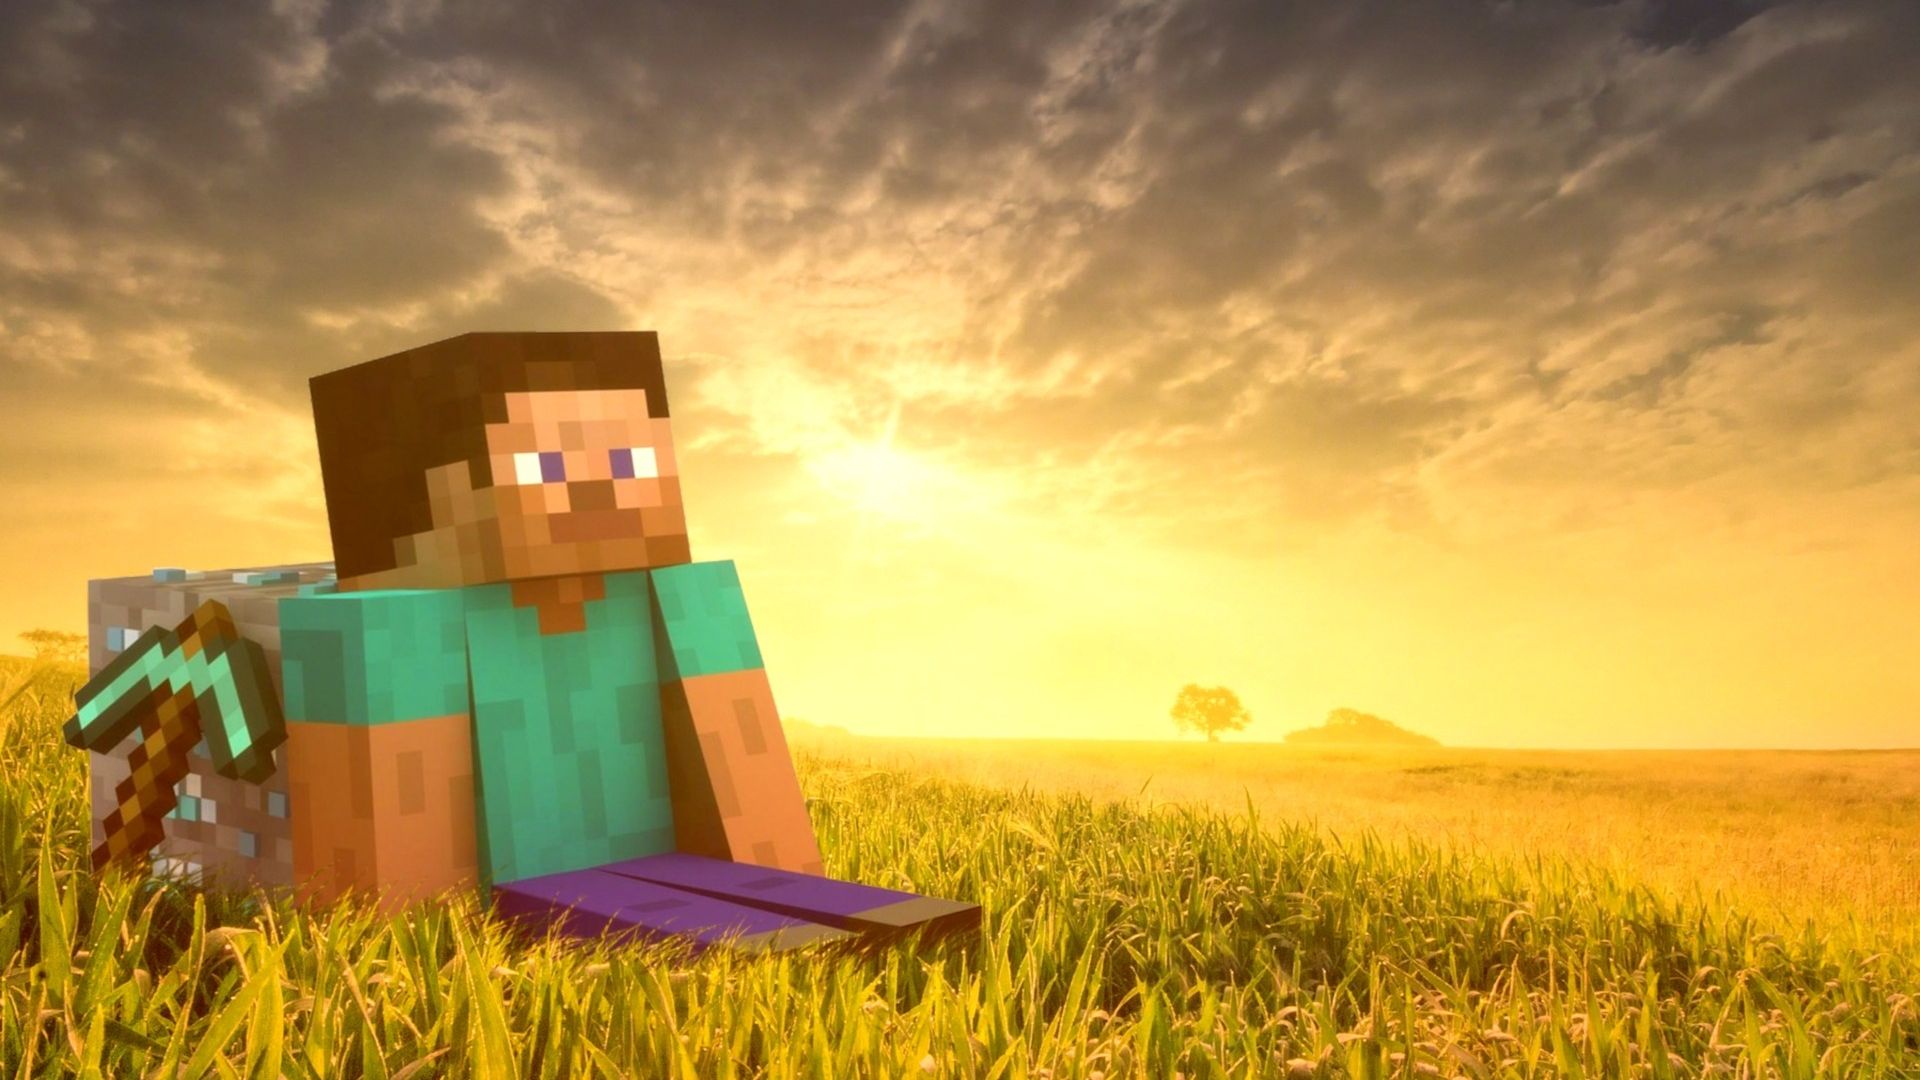 Minecraft Steve after a hard day of digging